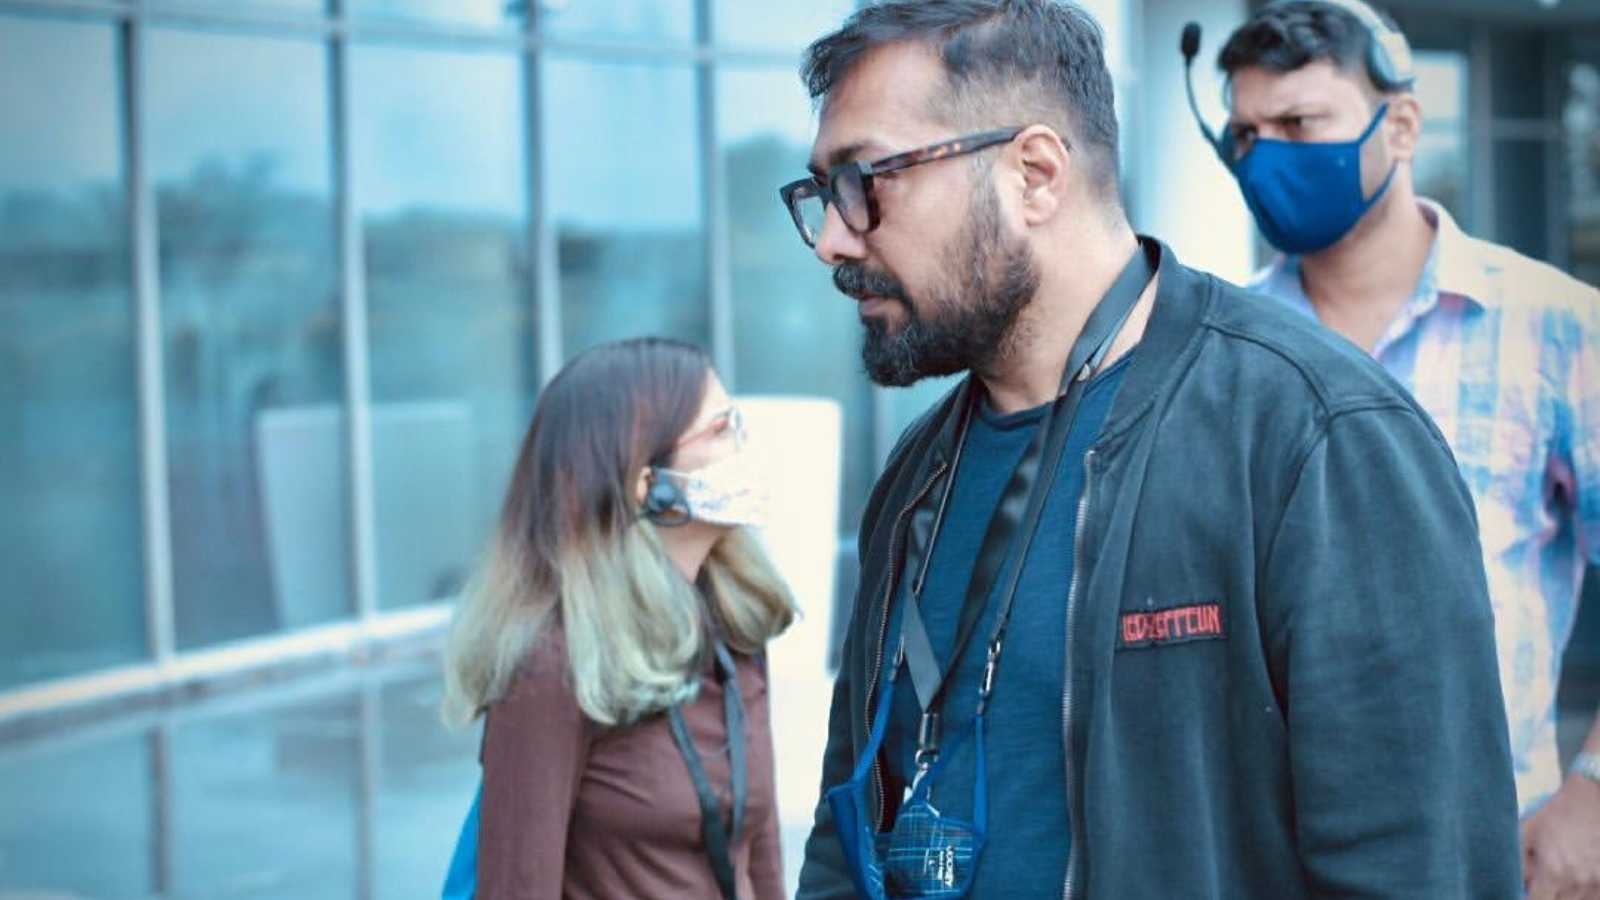 Anurag Kashyap revealed he suffered heart attack last year, shares why he didn't hit pause on work to rest: 'Unlike other people ...'